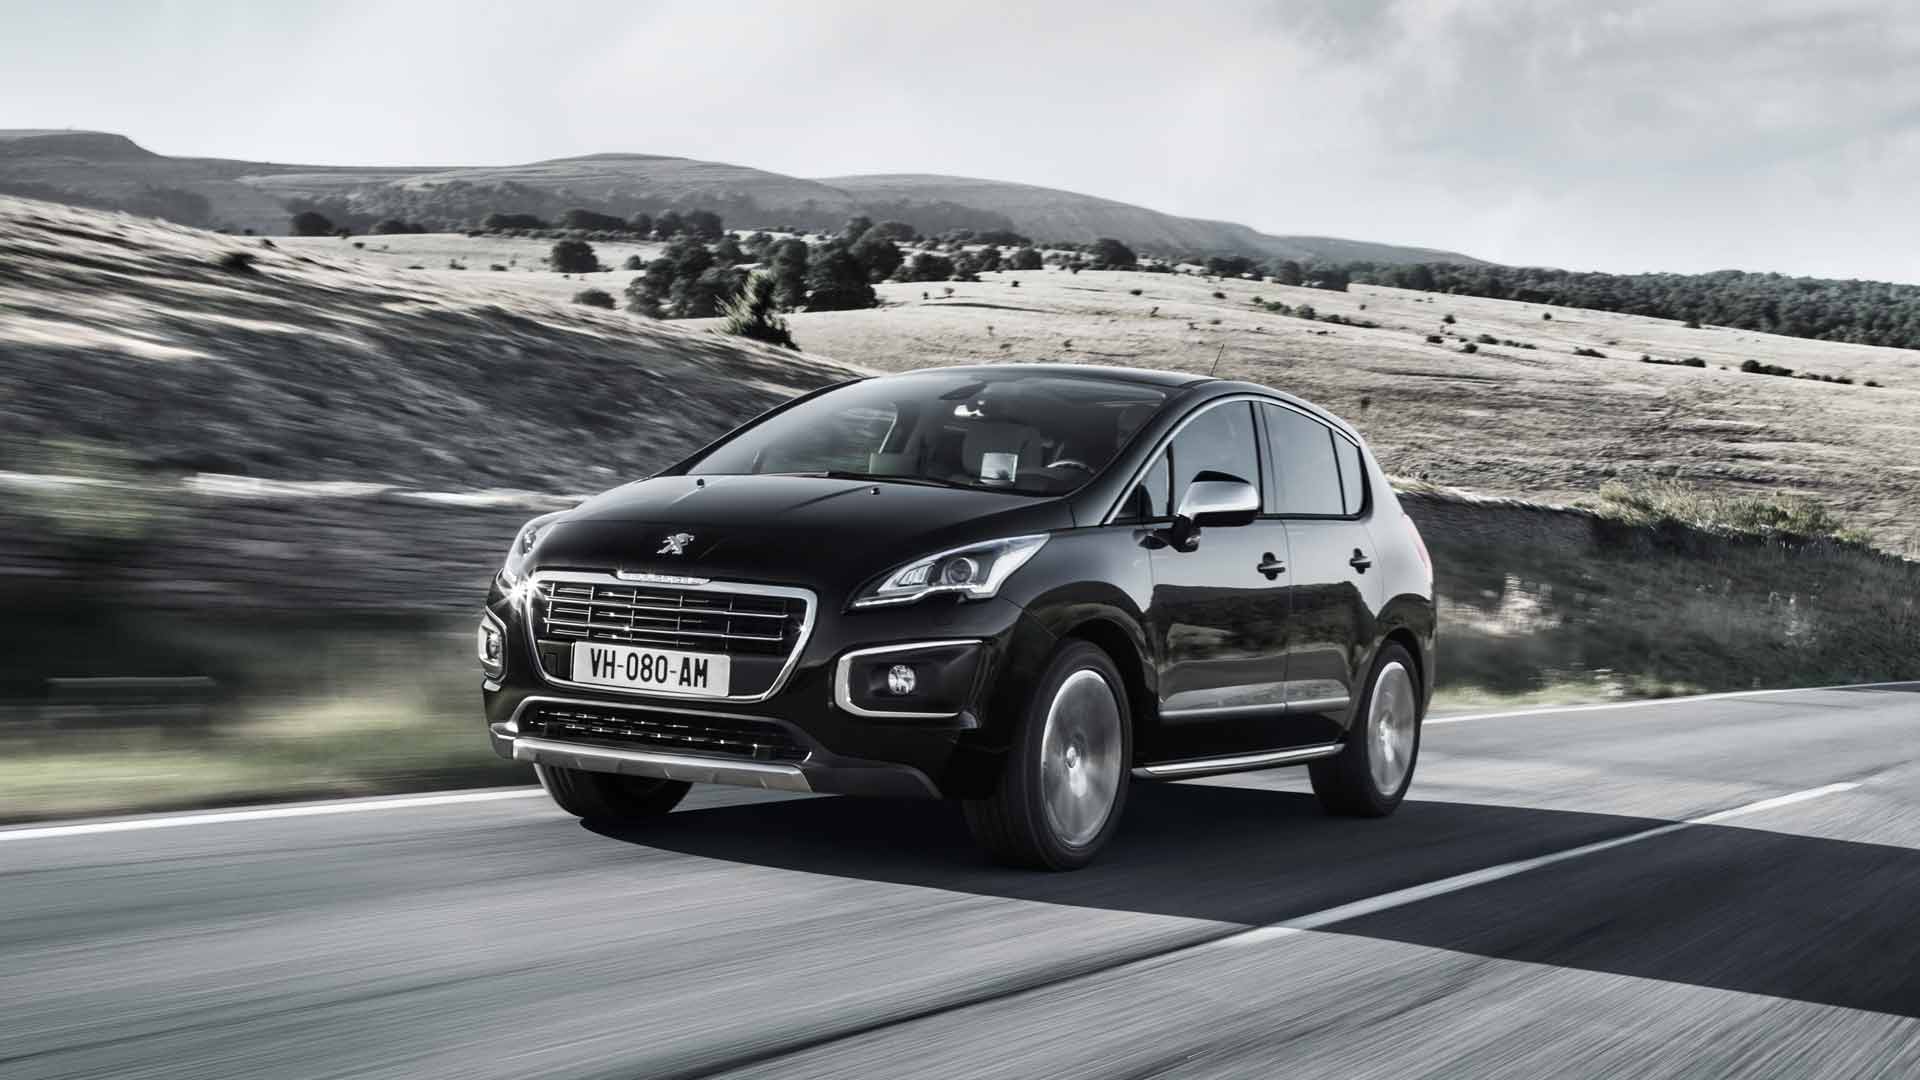 2016 Peugeot 3008 Review Lukewarm Crossover